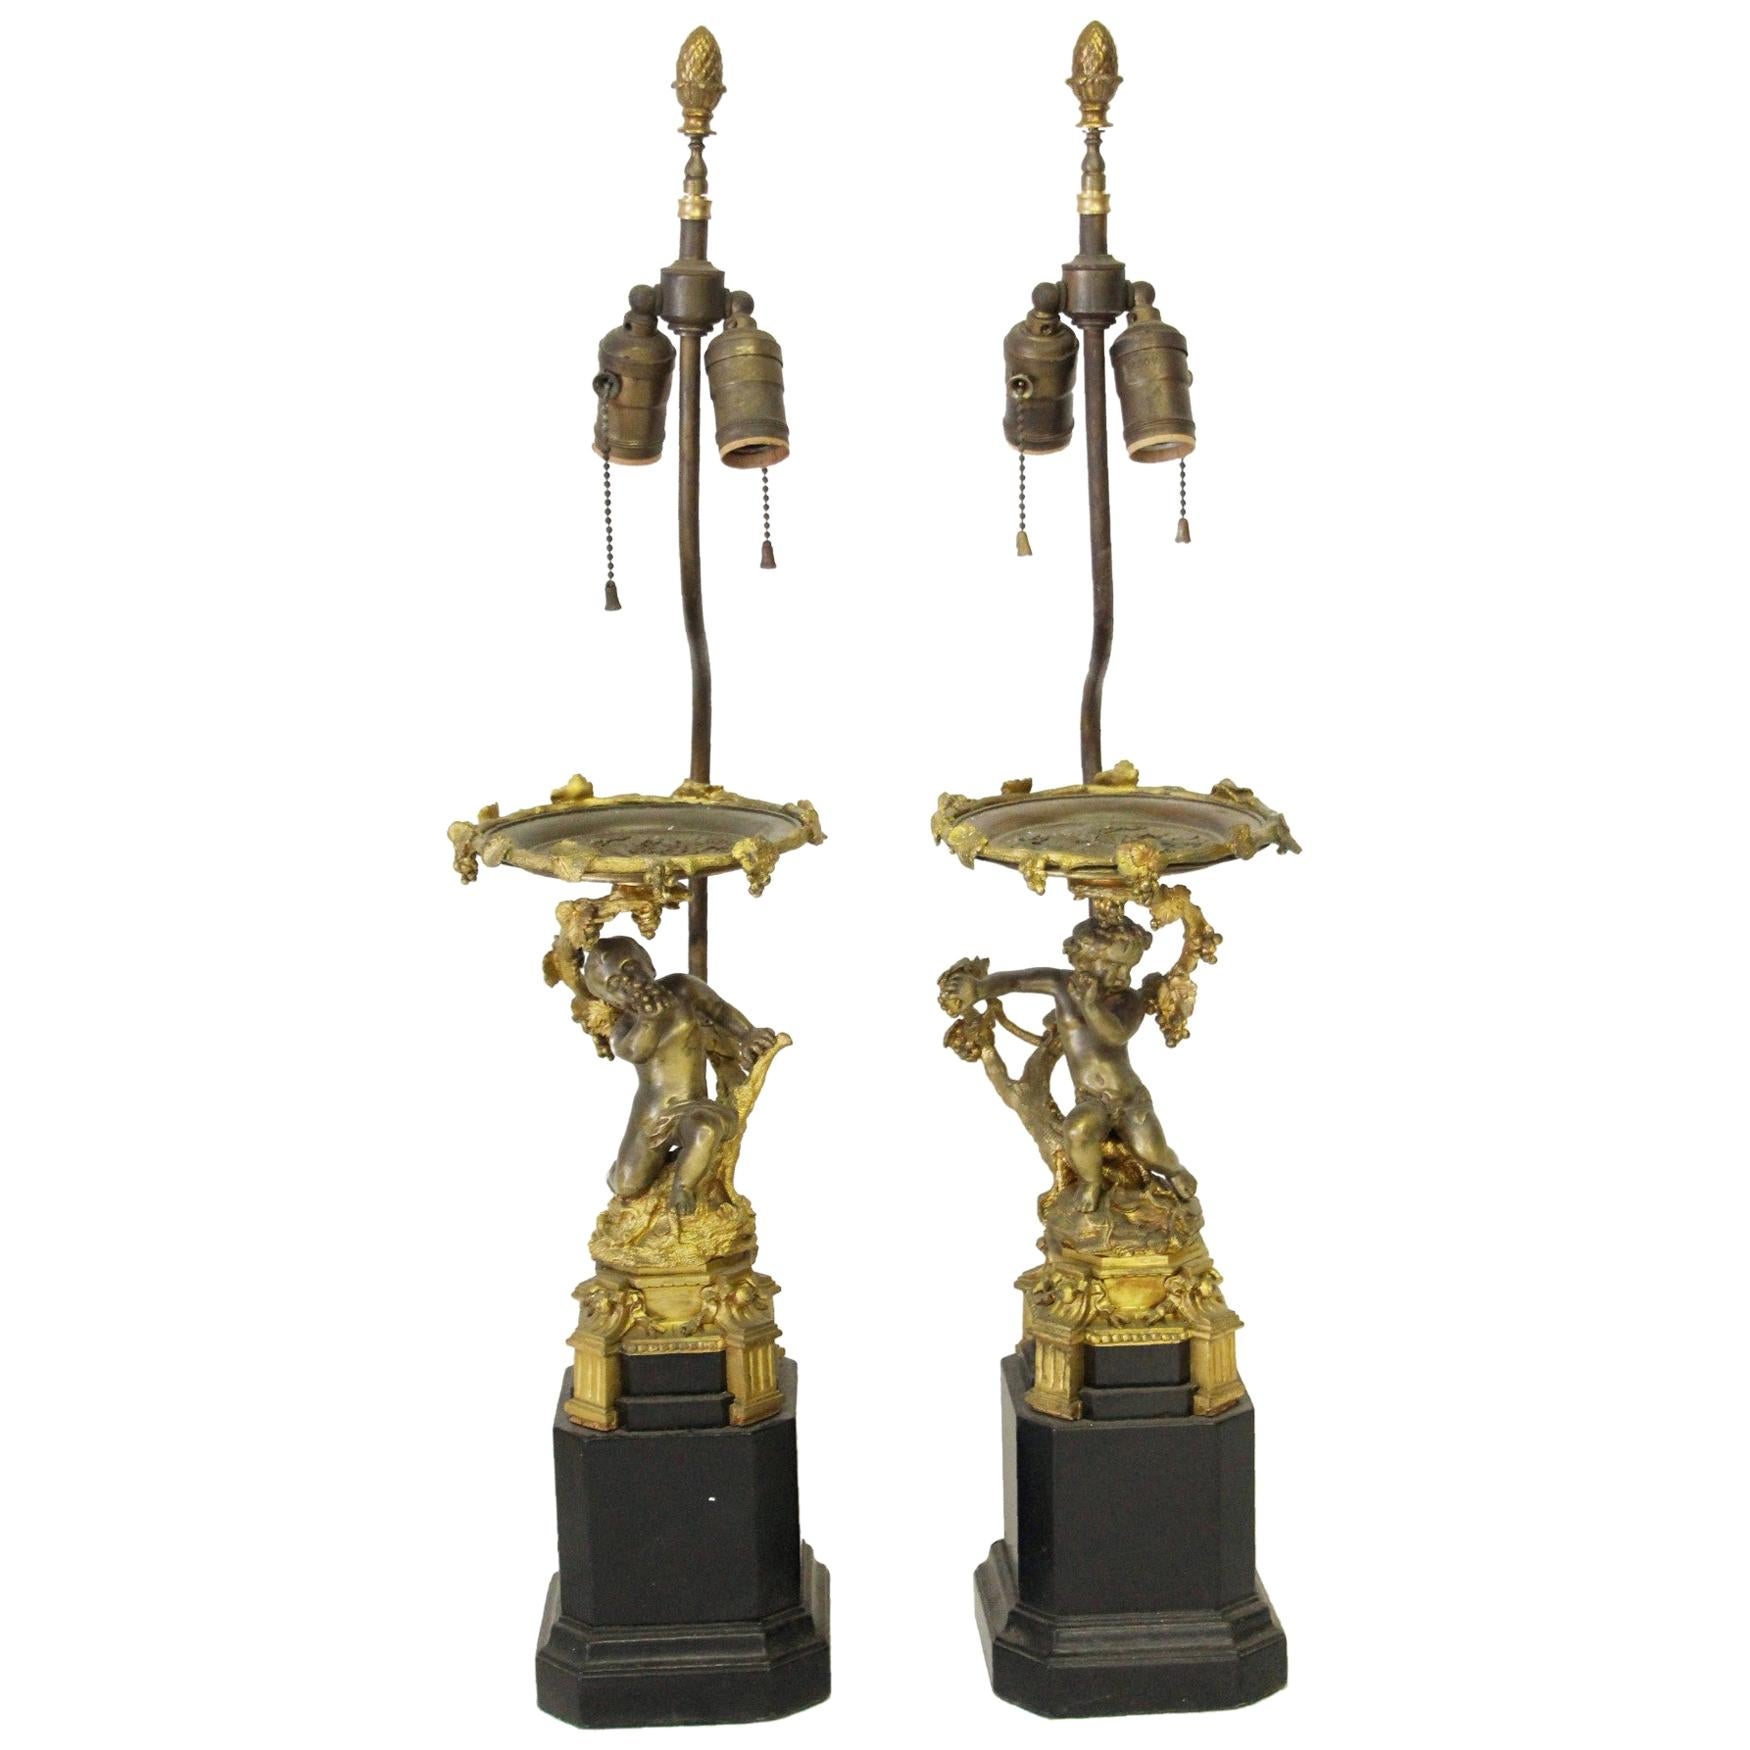 Pair of Victorian Brass Cherubic Onate Table Lamps with Two Lights Each